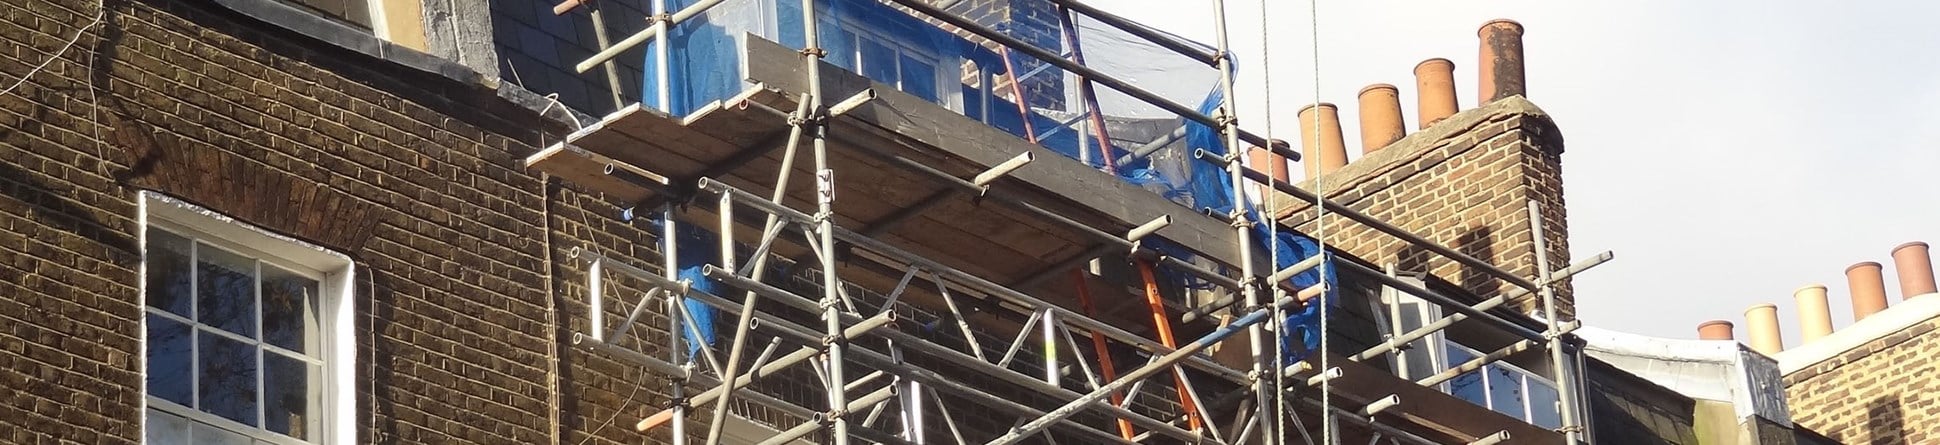 Scaffolding on building